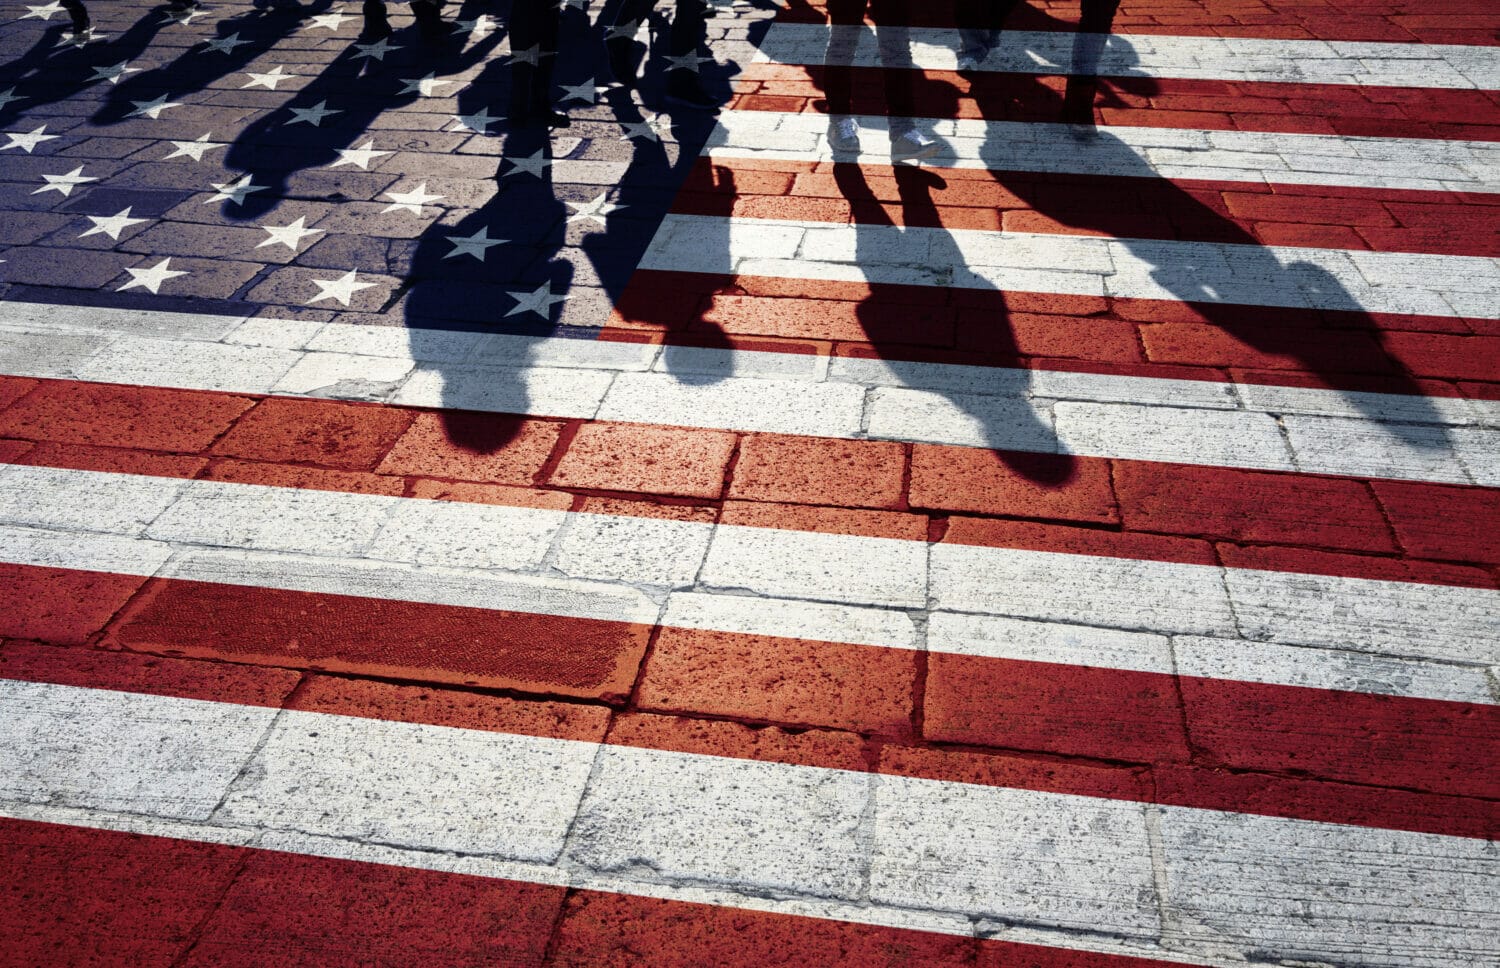 U.S. immigrant Shadows on a flag-painted paved street